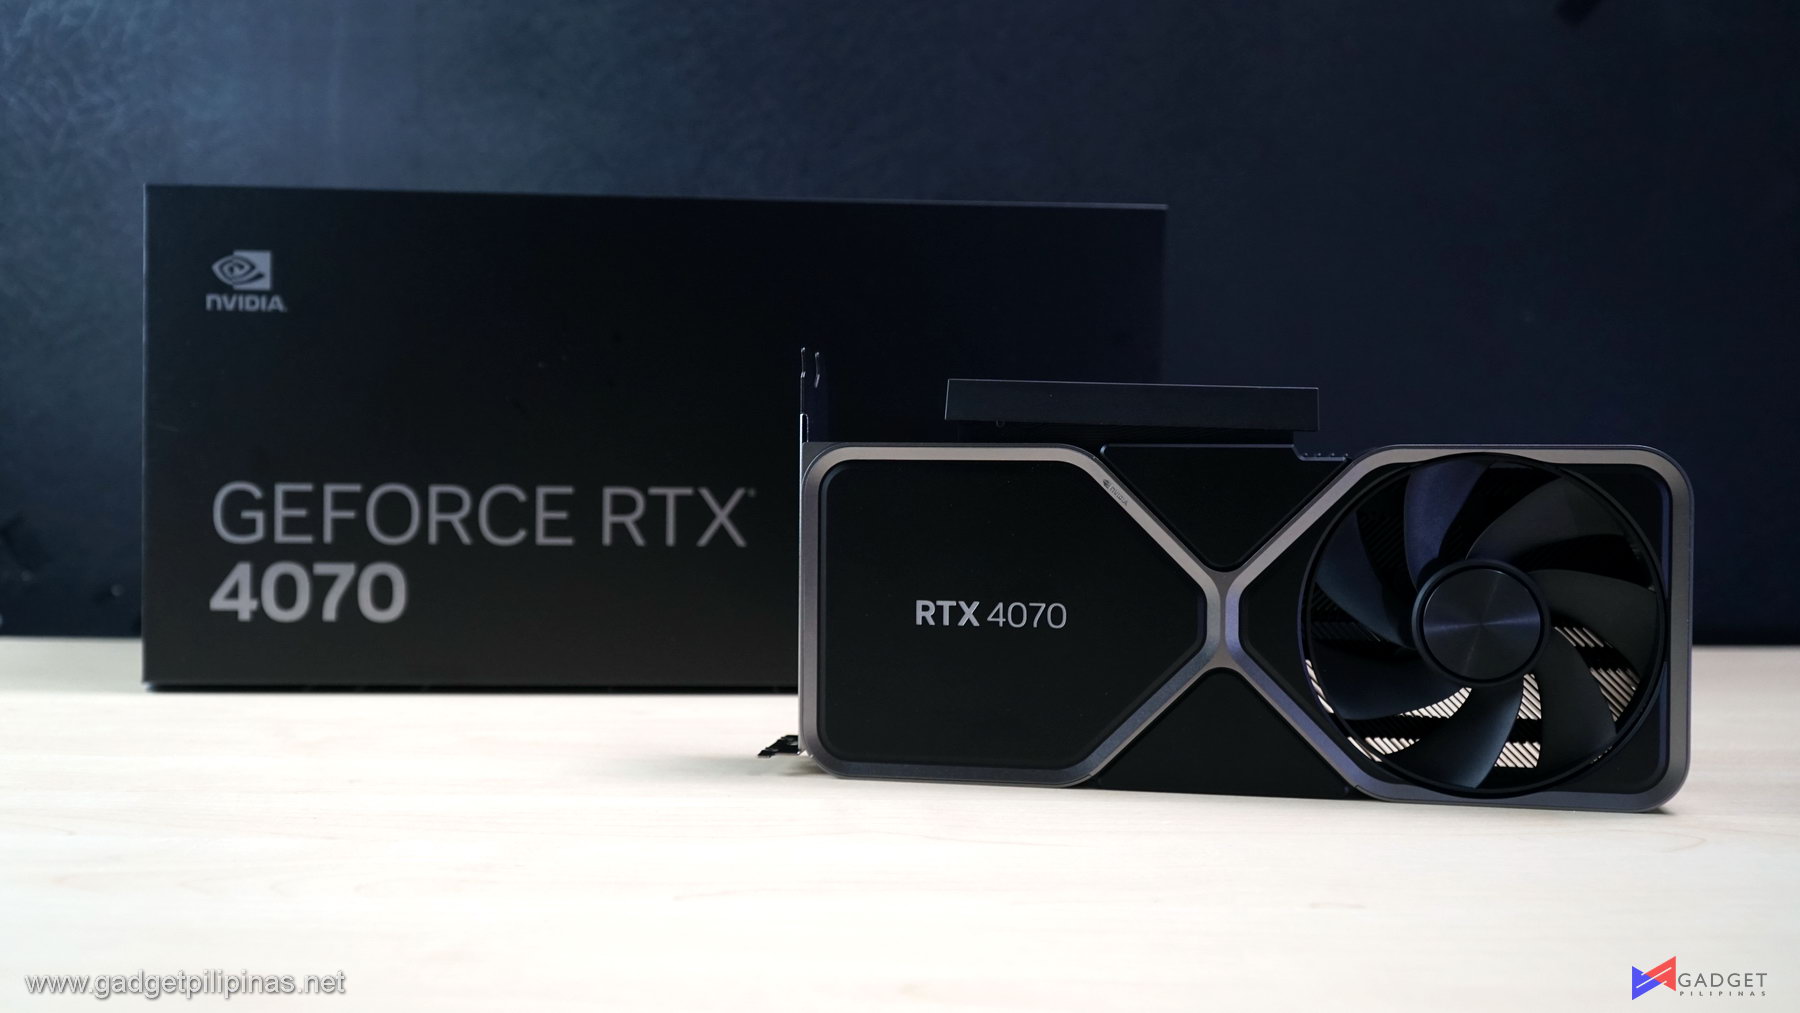 Nvidia GeForce RTX 4070 Founders Edition Graphics Card Review – A Solid Choice For Some